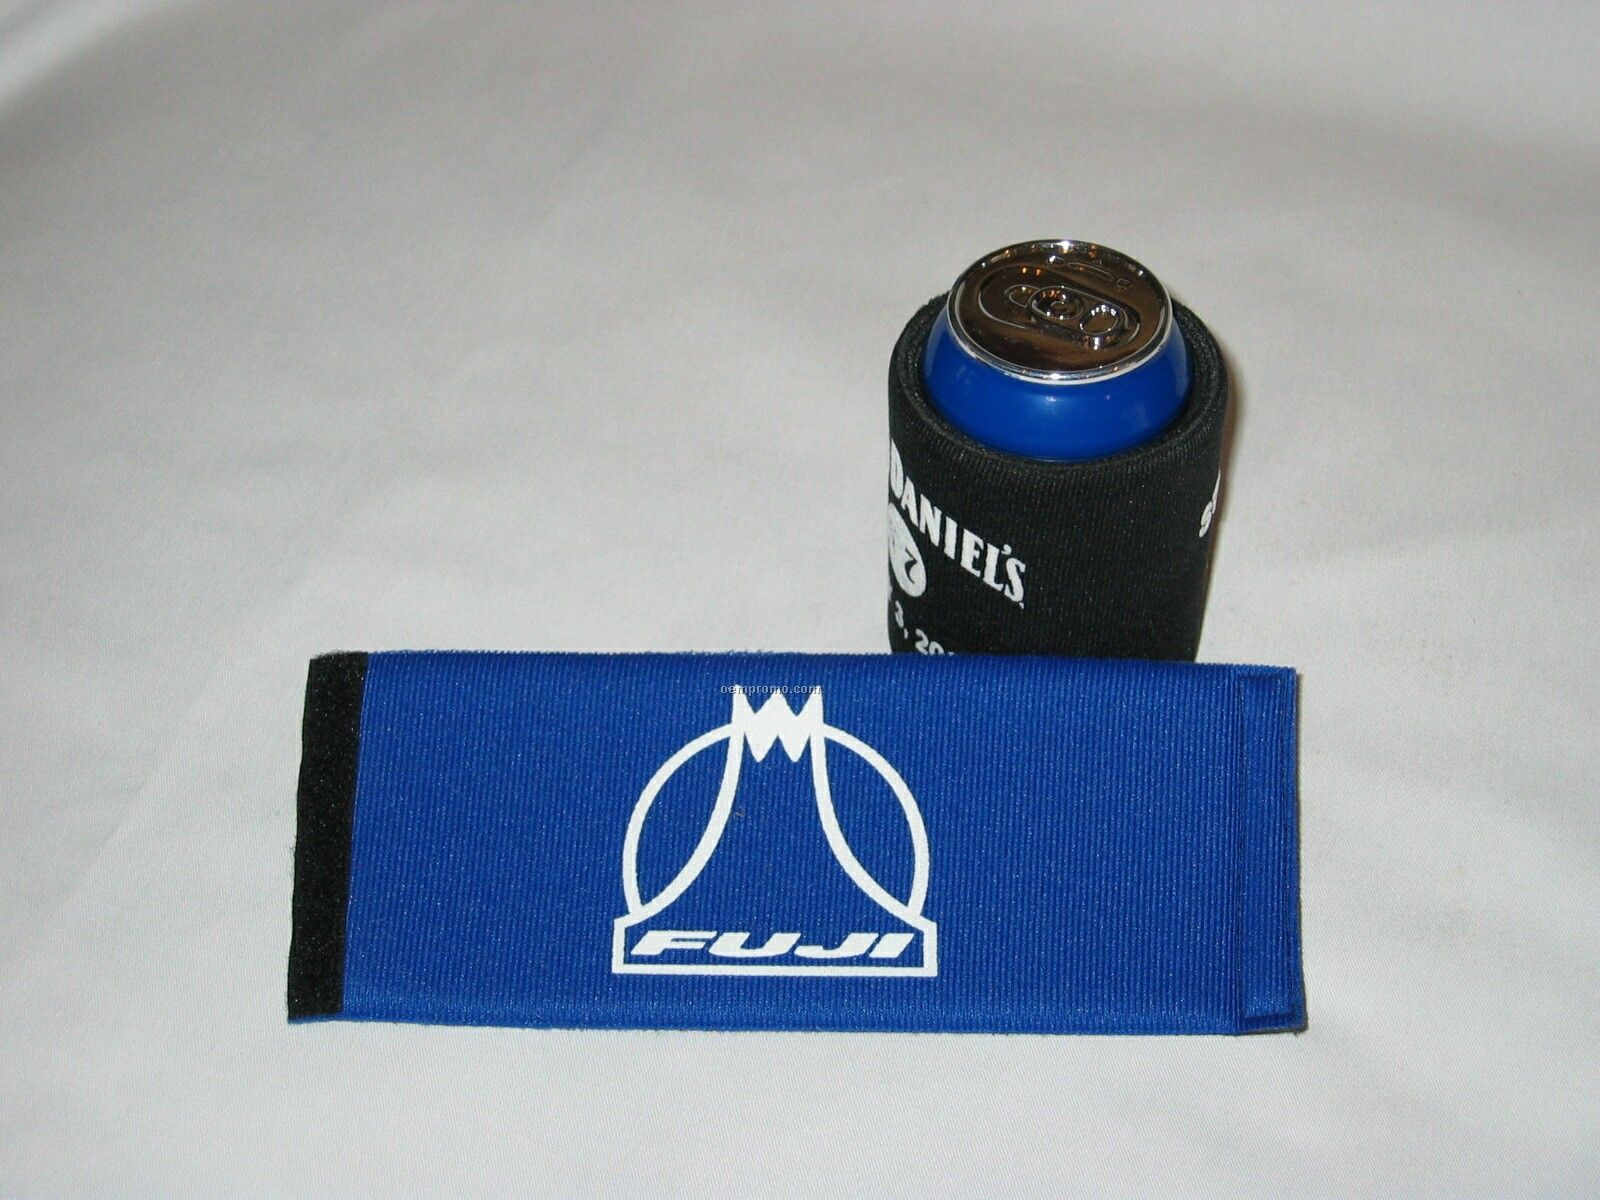 Supper Rapper Collapsible Beverage Can Holder With Velcro